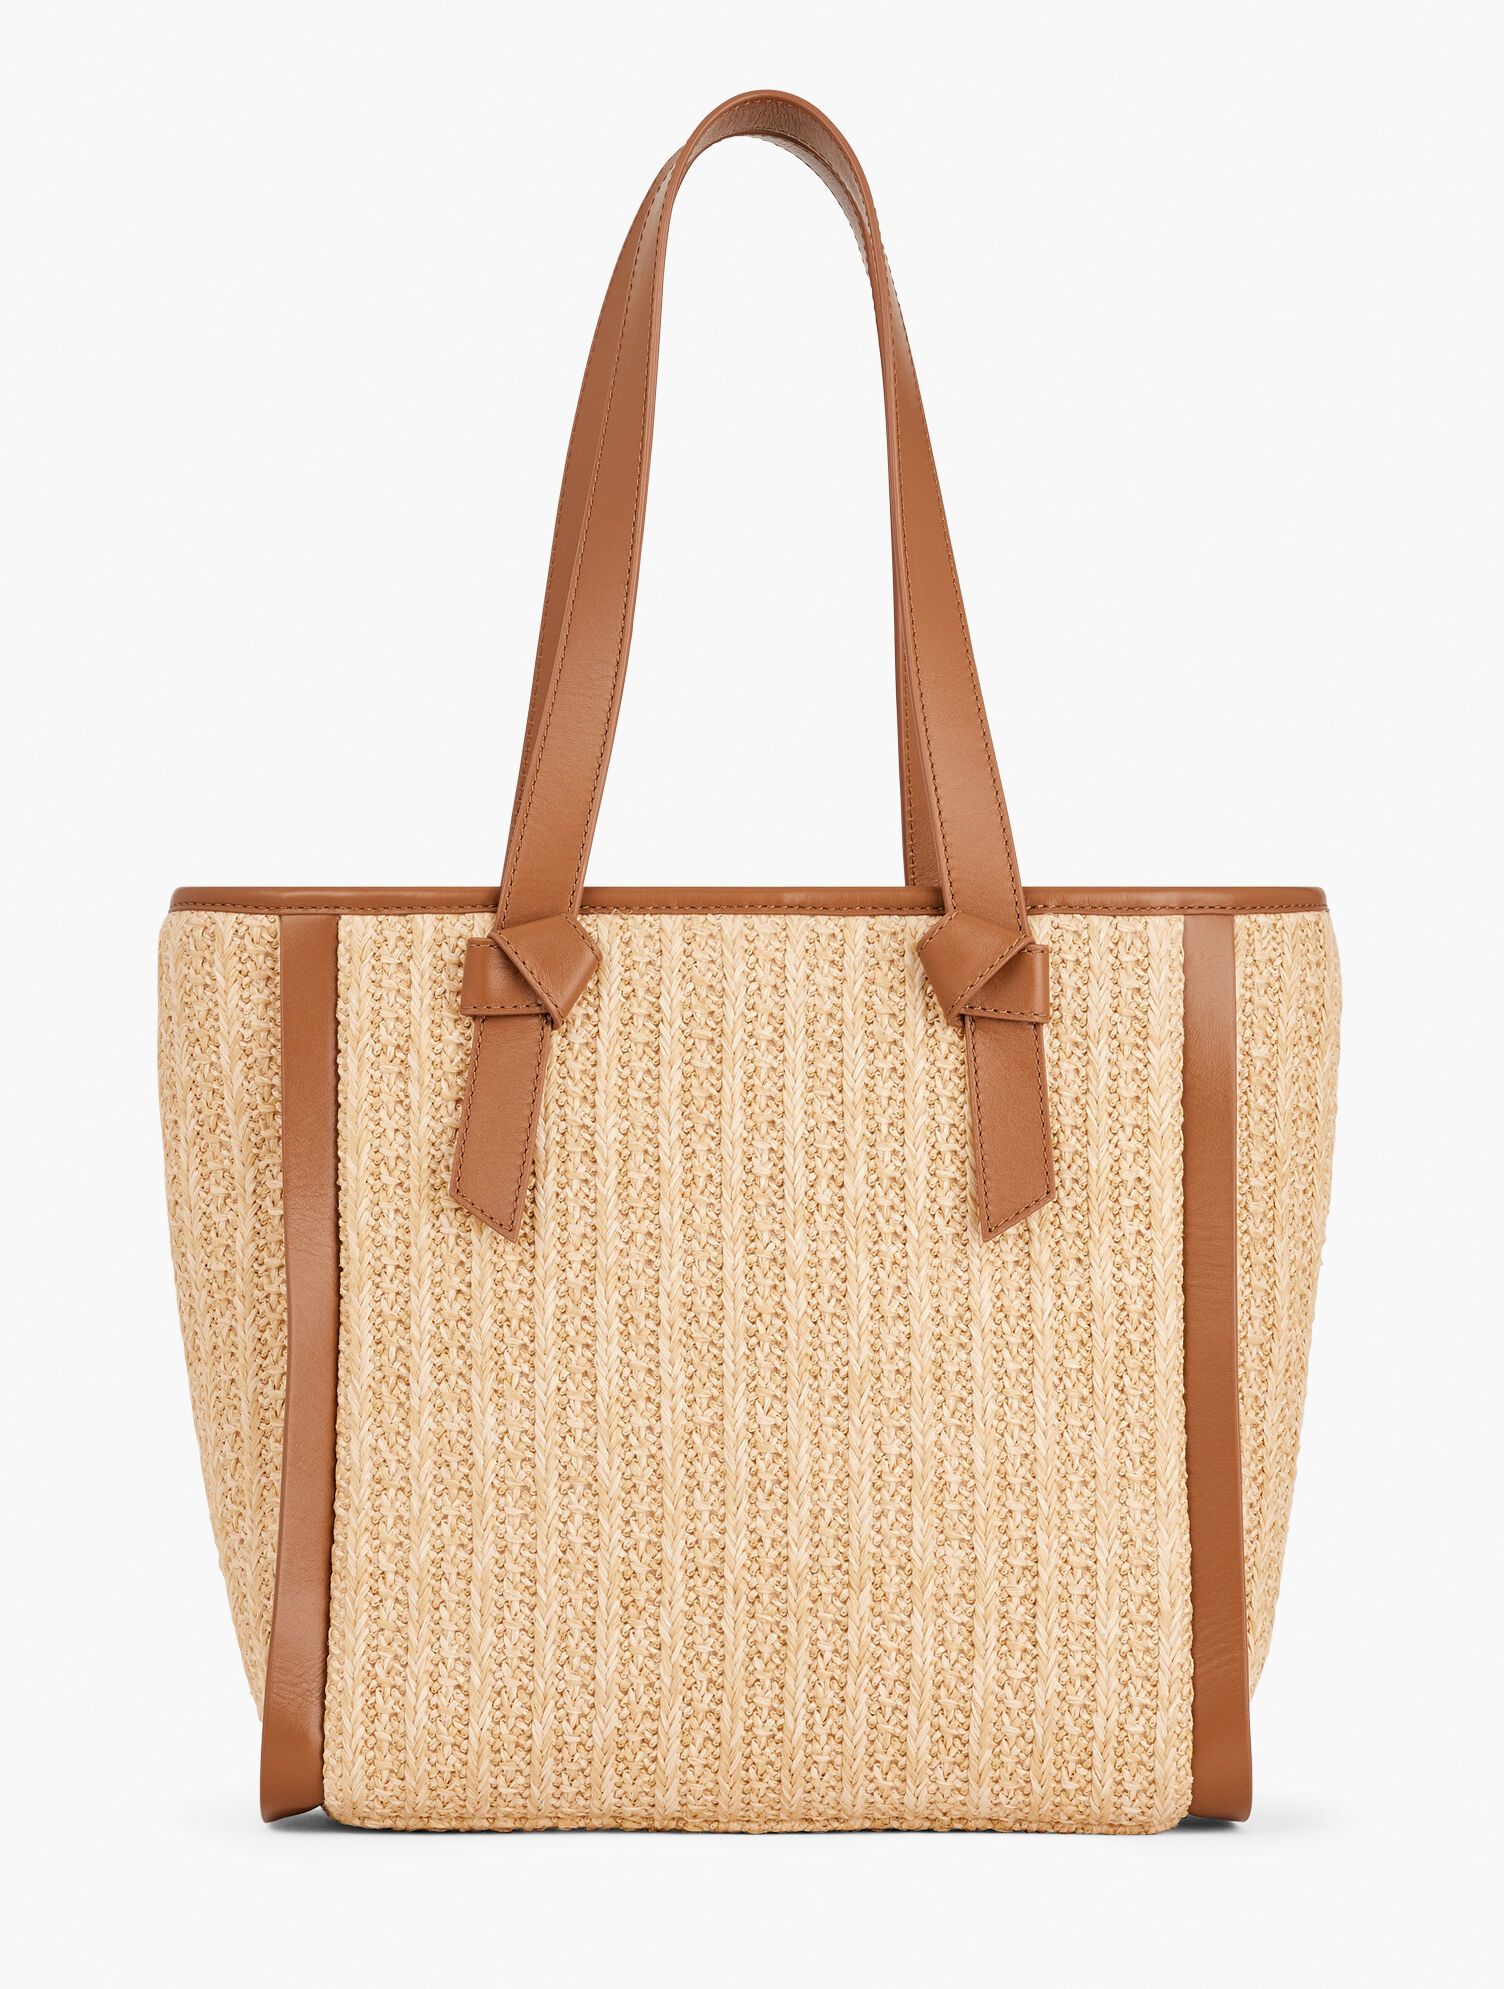 Caning Stripe Woven Tote | Talbots